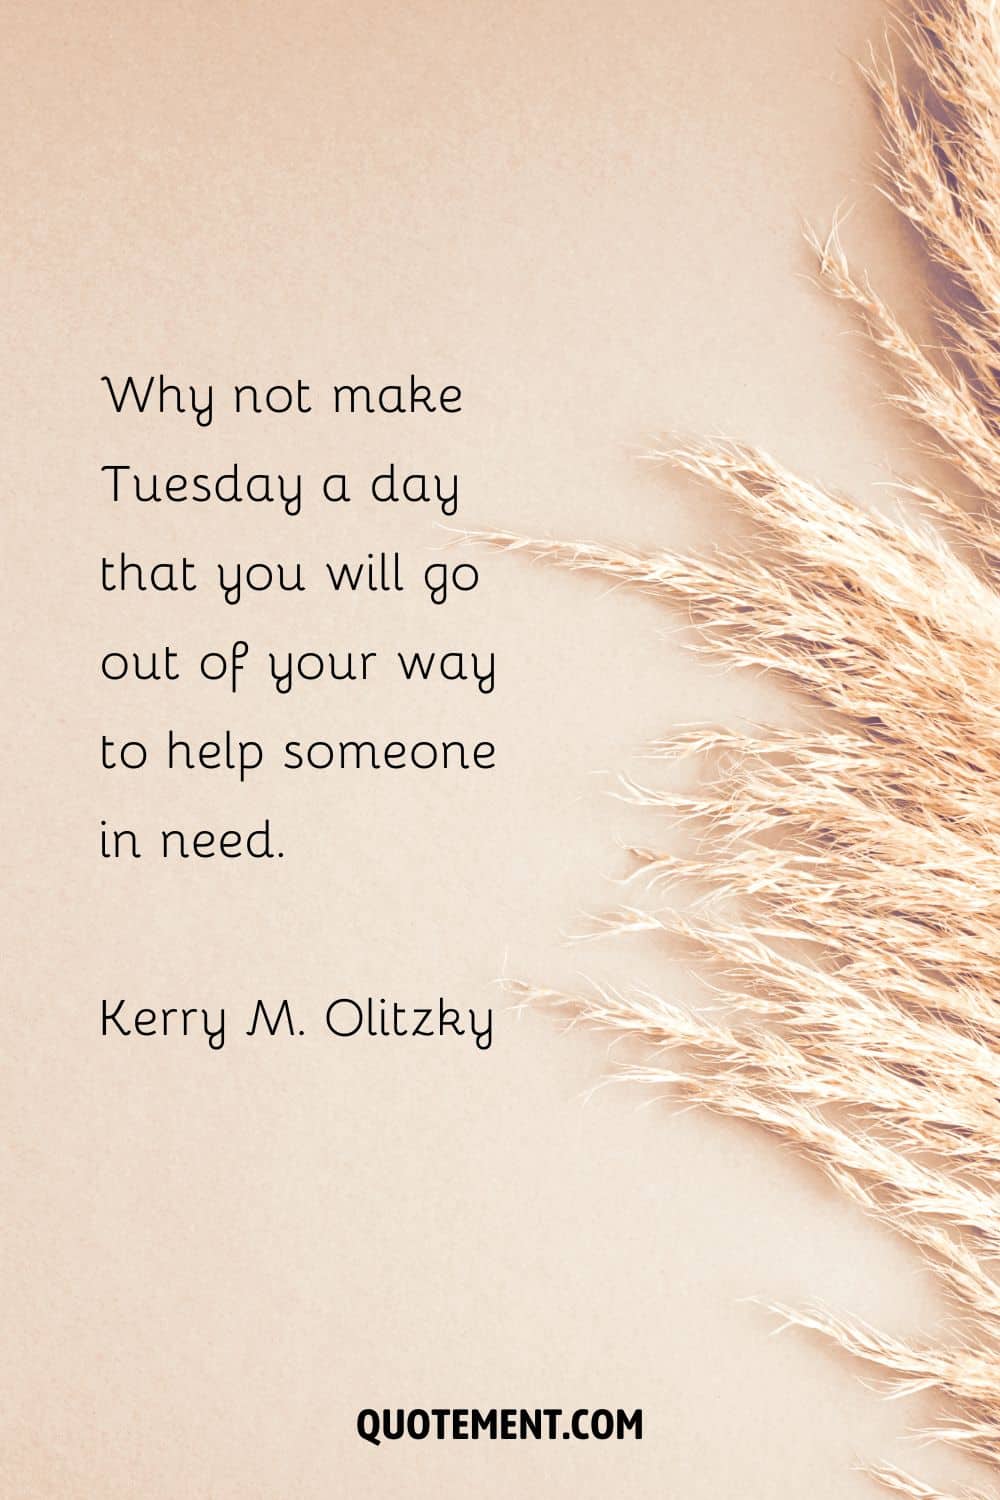 “Why not make Tuesday a day that you will go out of your way to help someone in need.” — Kerry M. Olitzky